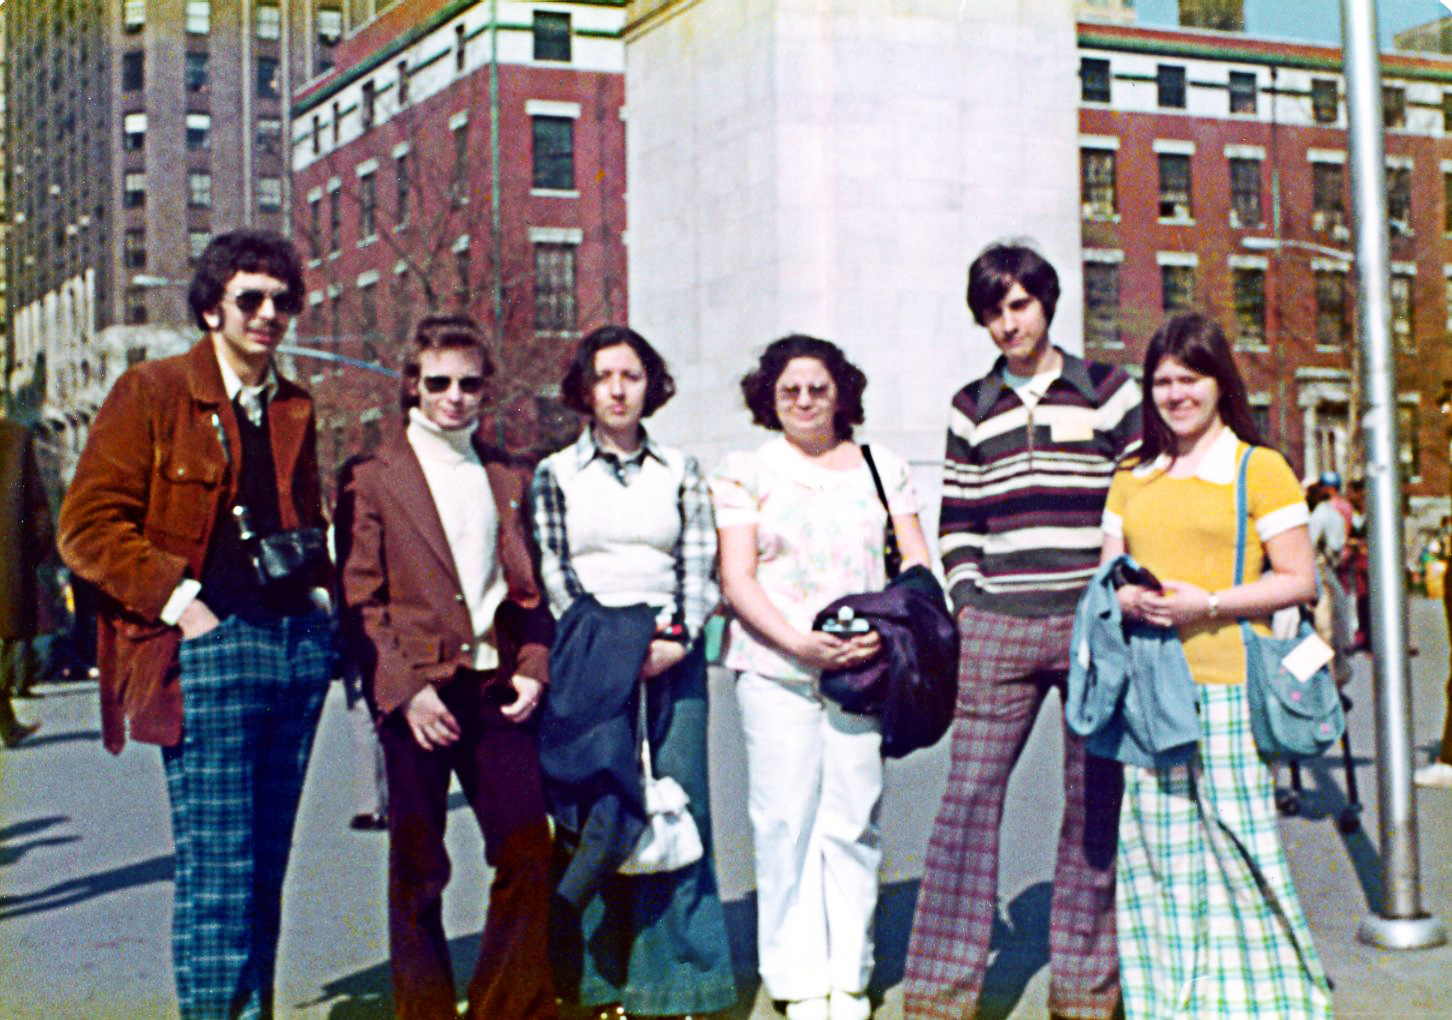 A young Carlo Martina with friends in New York City.